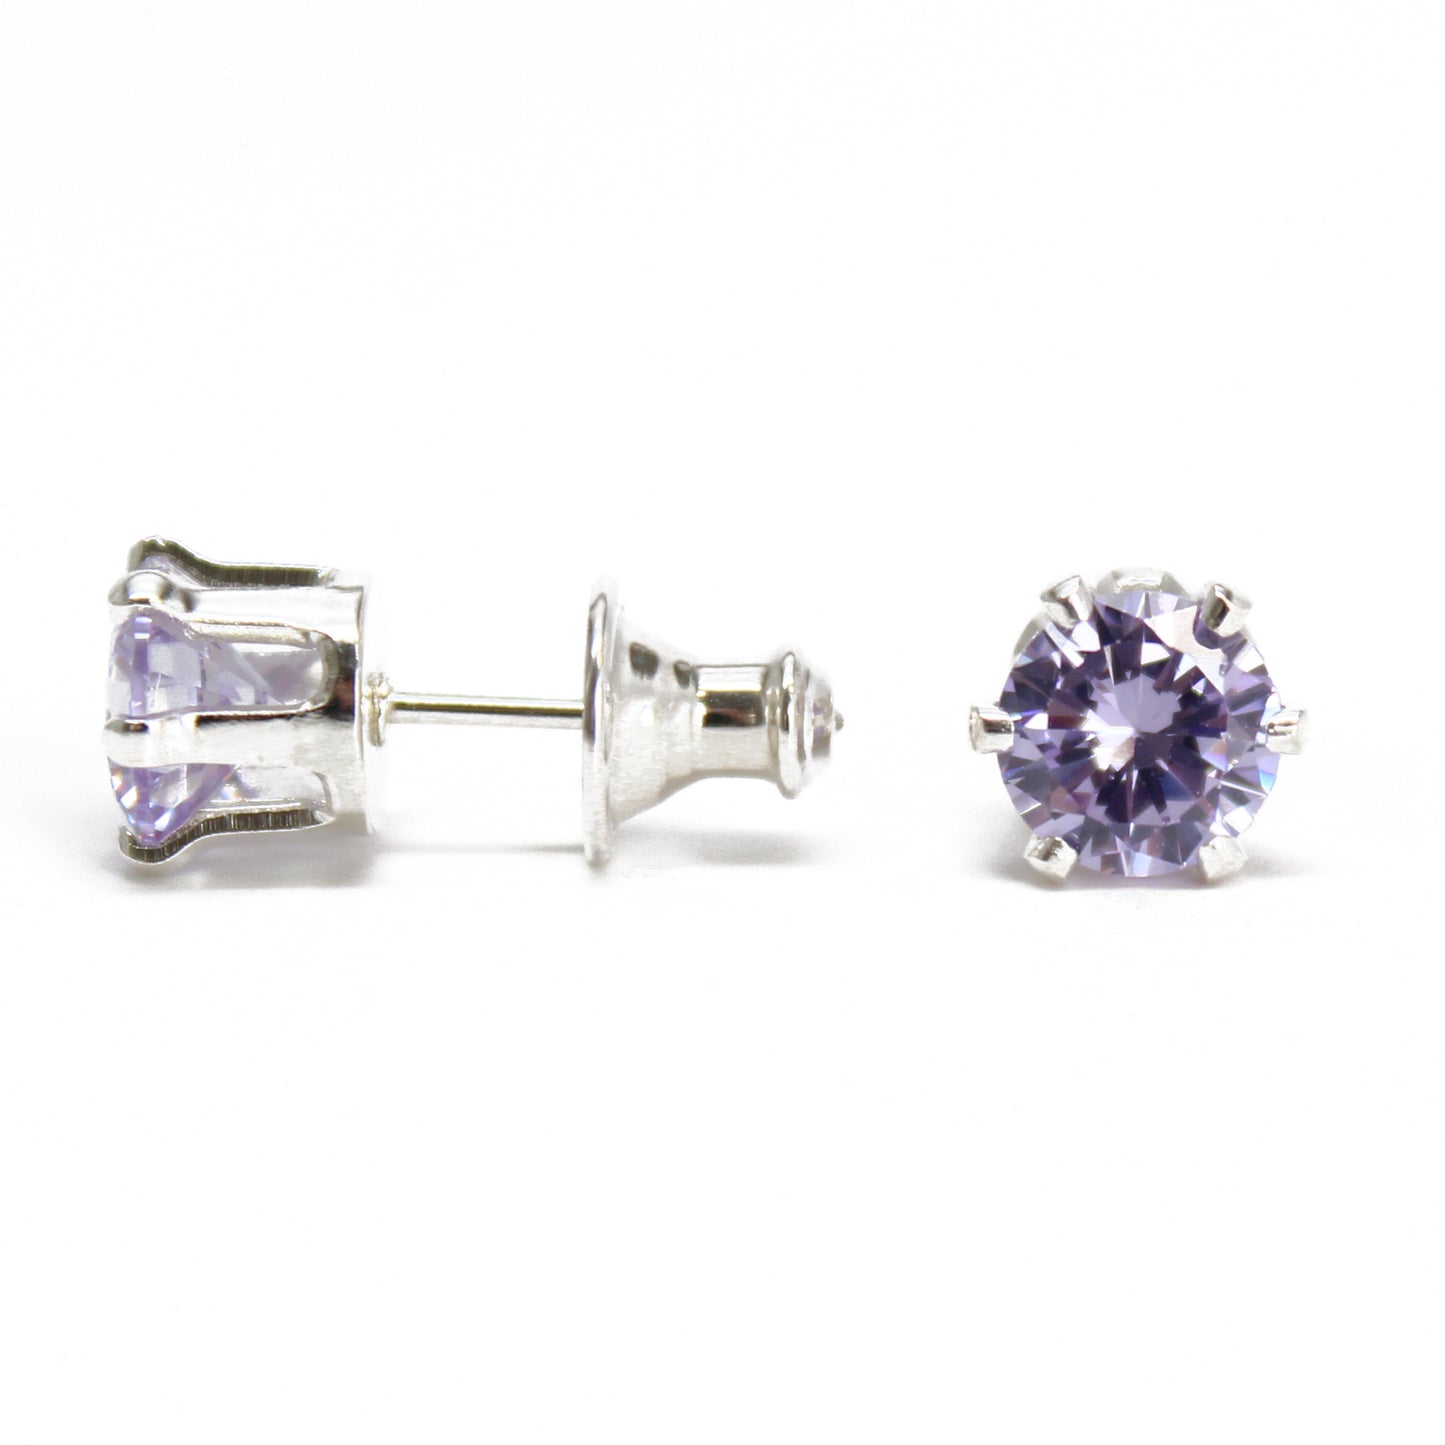 Lavender CZ Stud Earrings, 6mm Round Prong Set 925 Sterling Silver Pale Purple Studs